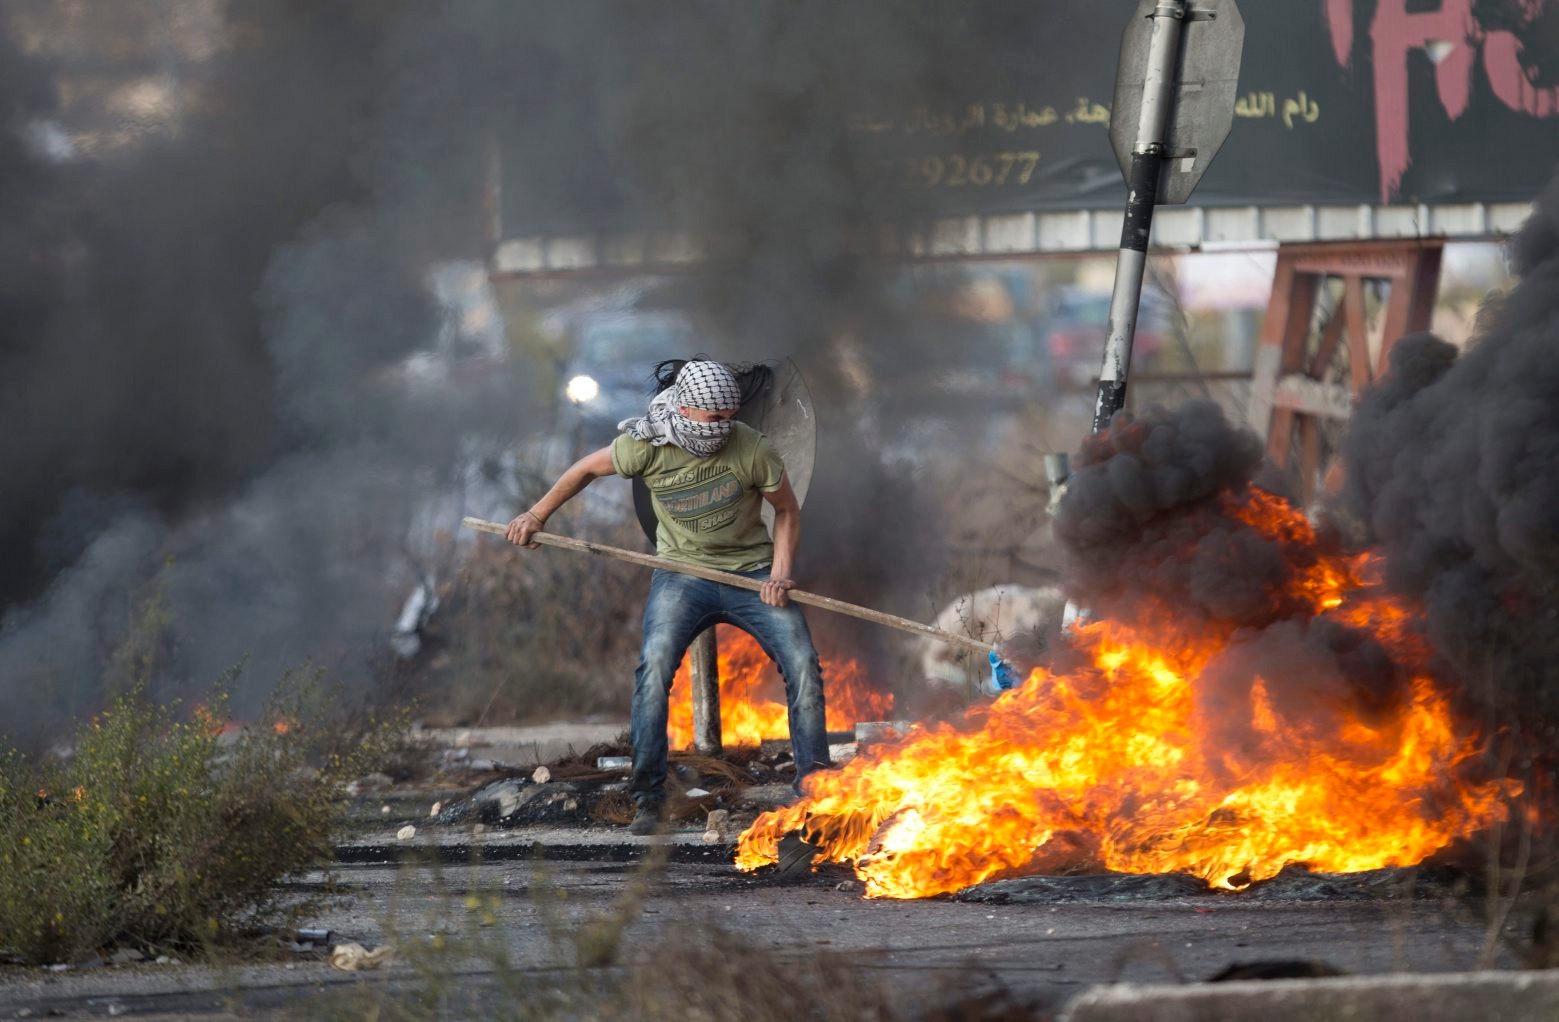 A Palestinian pushes burning tries during clashes with Israeli troops near Ramallah, West Bank, Tuesday, Oct. 13, 2015. A pair of Palestinian men boarded a bus in Jerusalem and began shooting and stabbing passengers, while another assailant rammed a car into a bus station before stabbing bystanders, in near-simultaneous attacks Tuesday that escalated a monthlong wave of violence. Three Israelis and two attackers were killed.  (AP Photo/Majdi Mohammed) Mideast Israel Palestinians